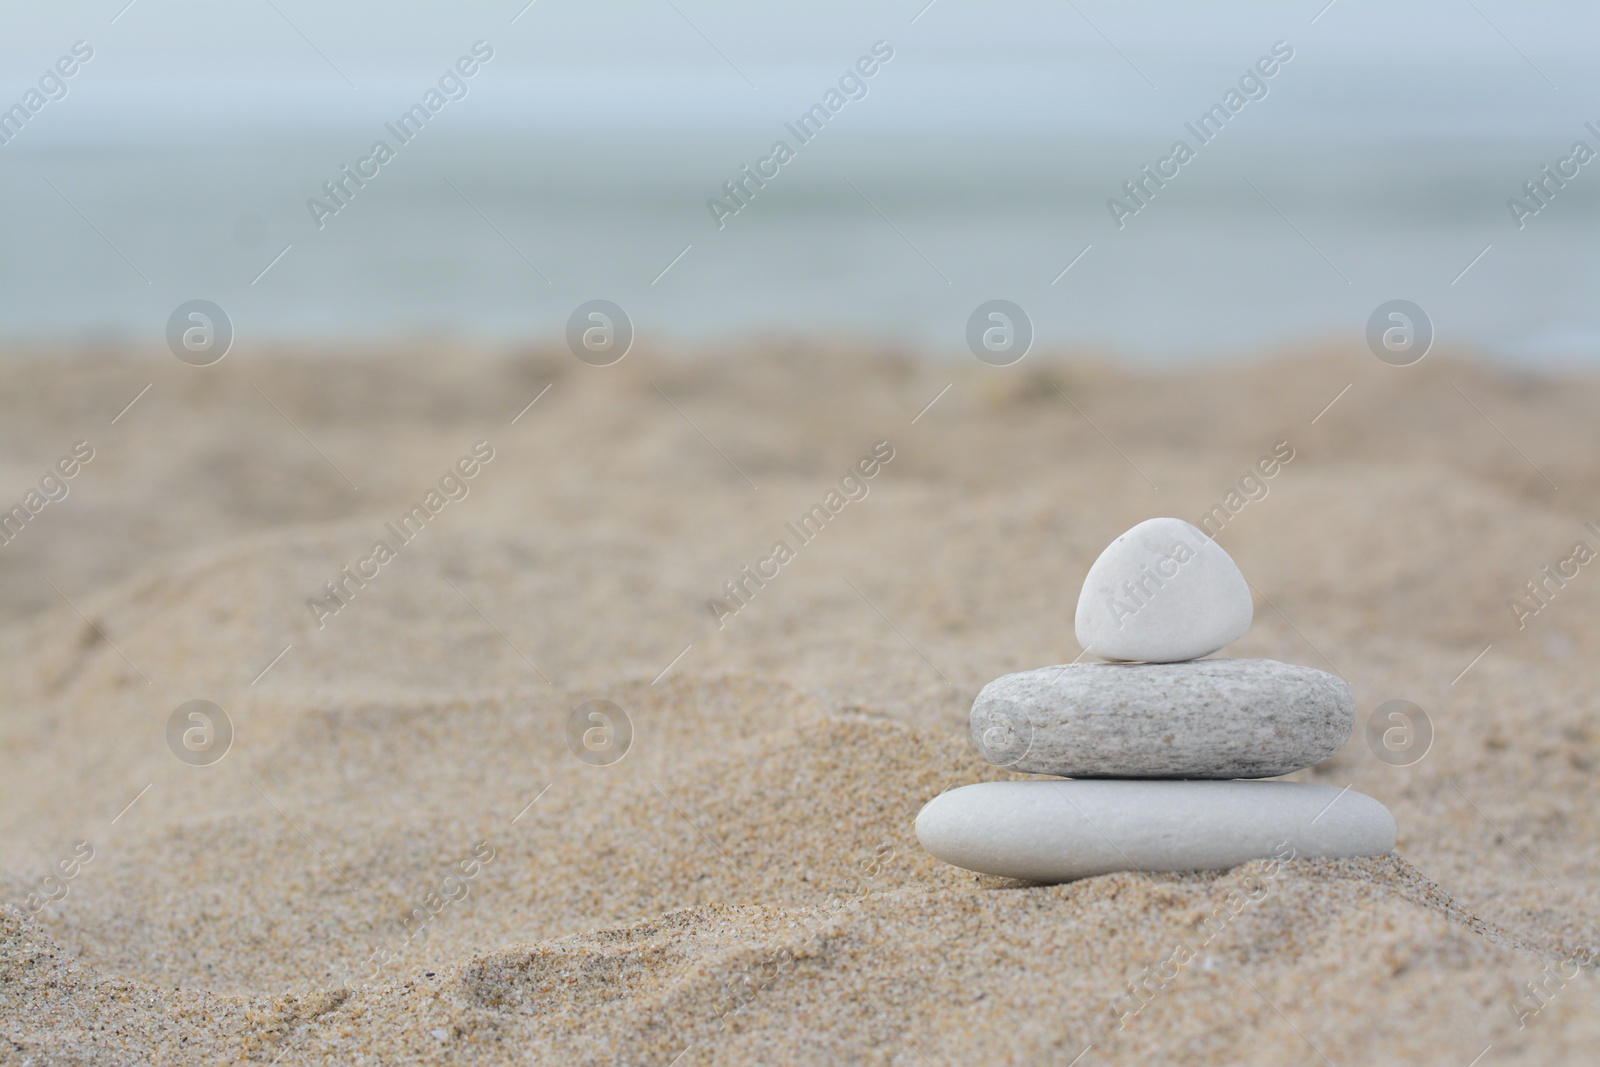 Photo of Stack of stones on sandy beach near sea, space for text